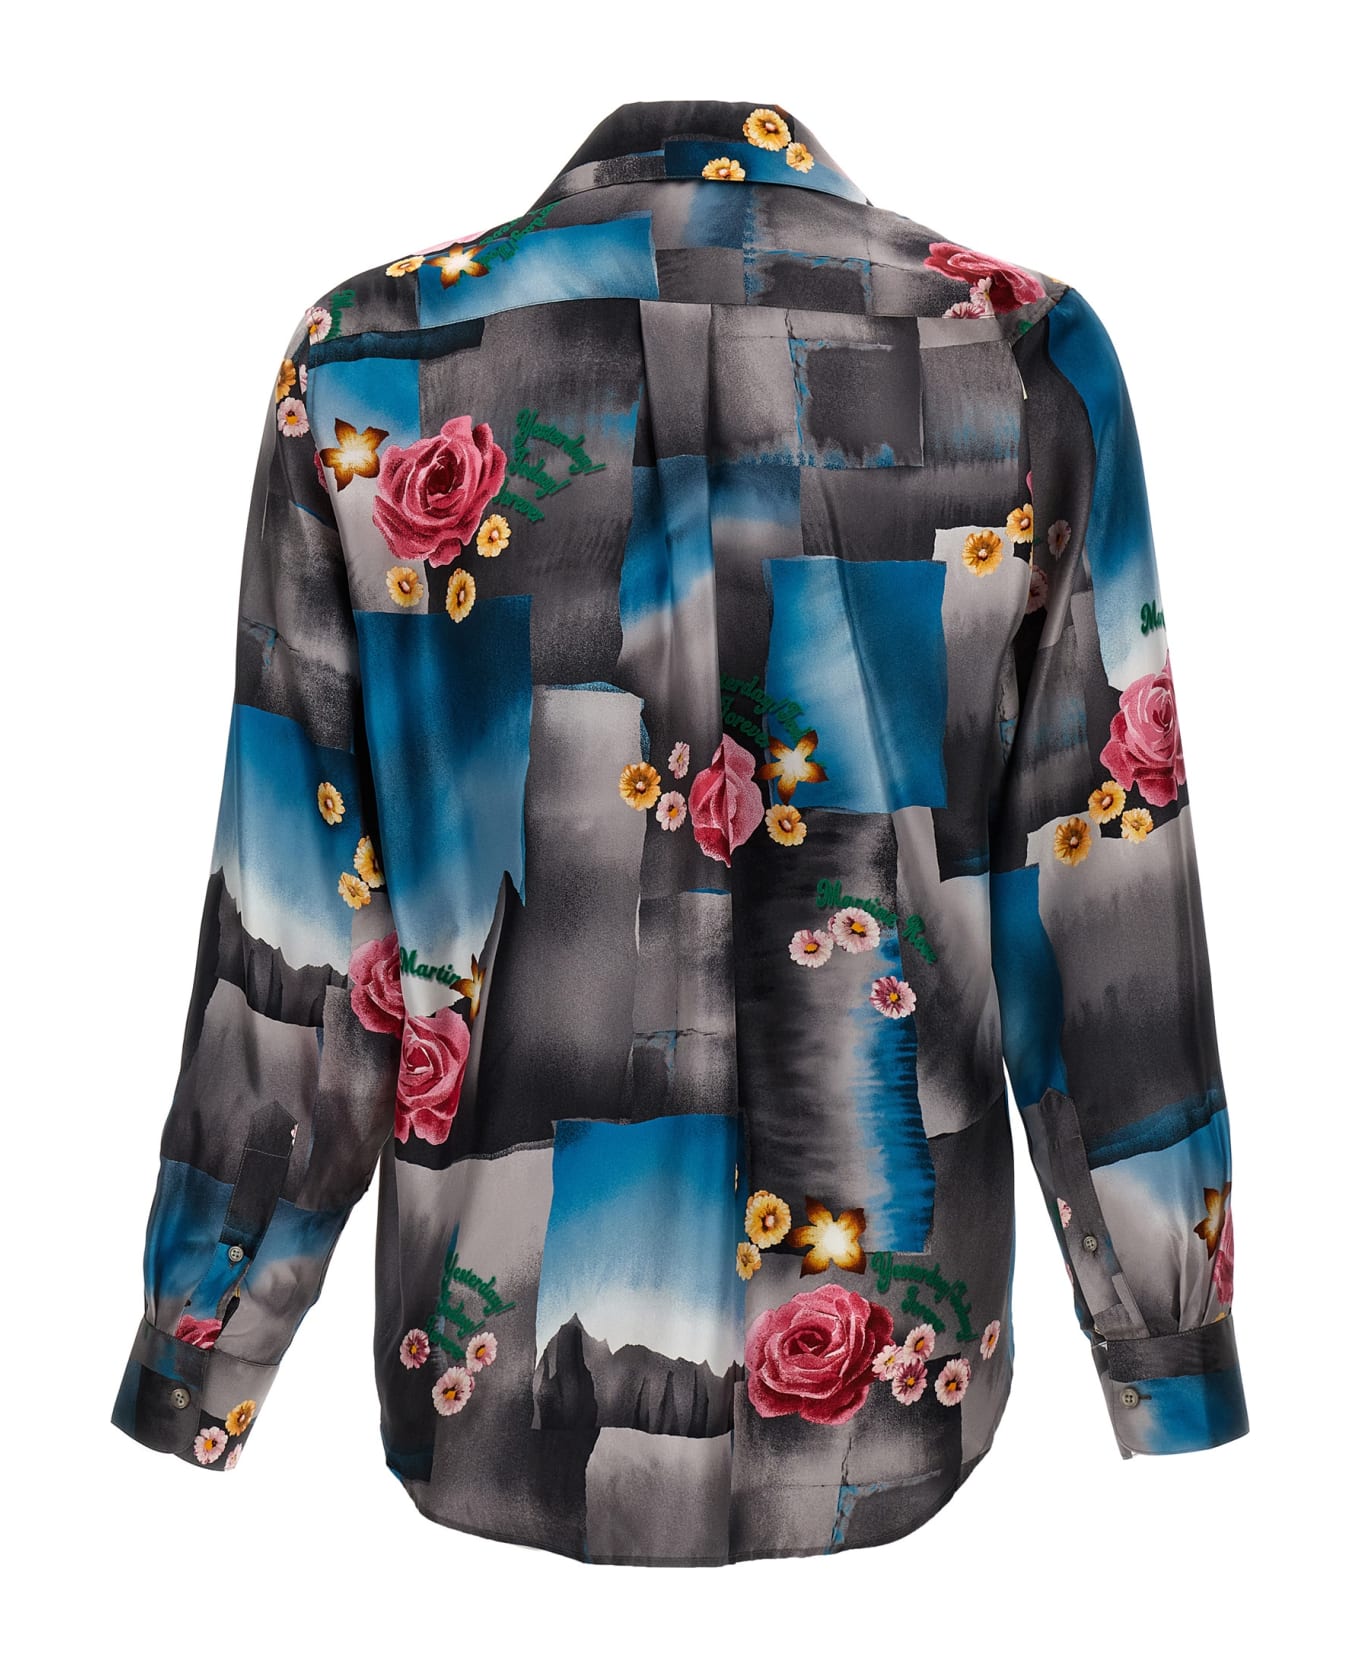 Martine Rose 'today Floral' Shirt - Multicolor